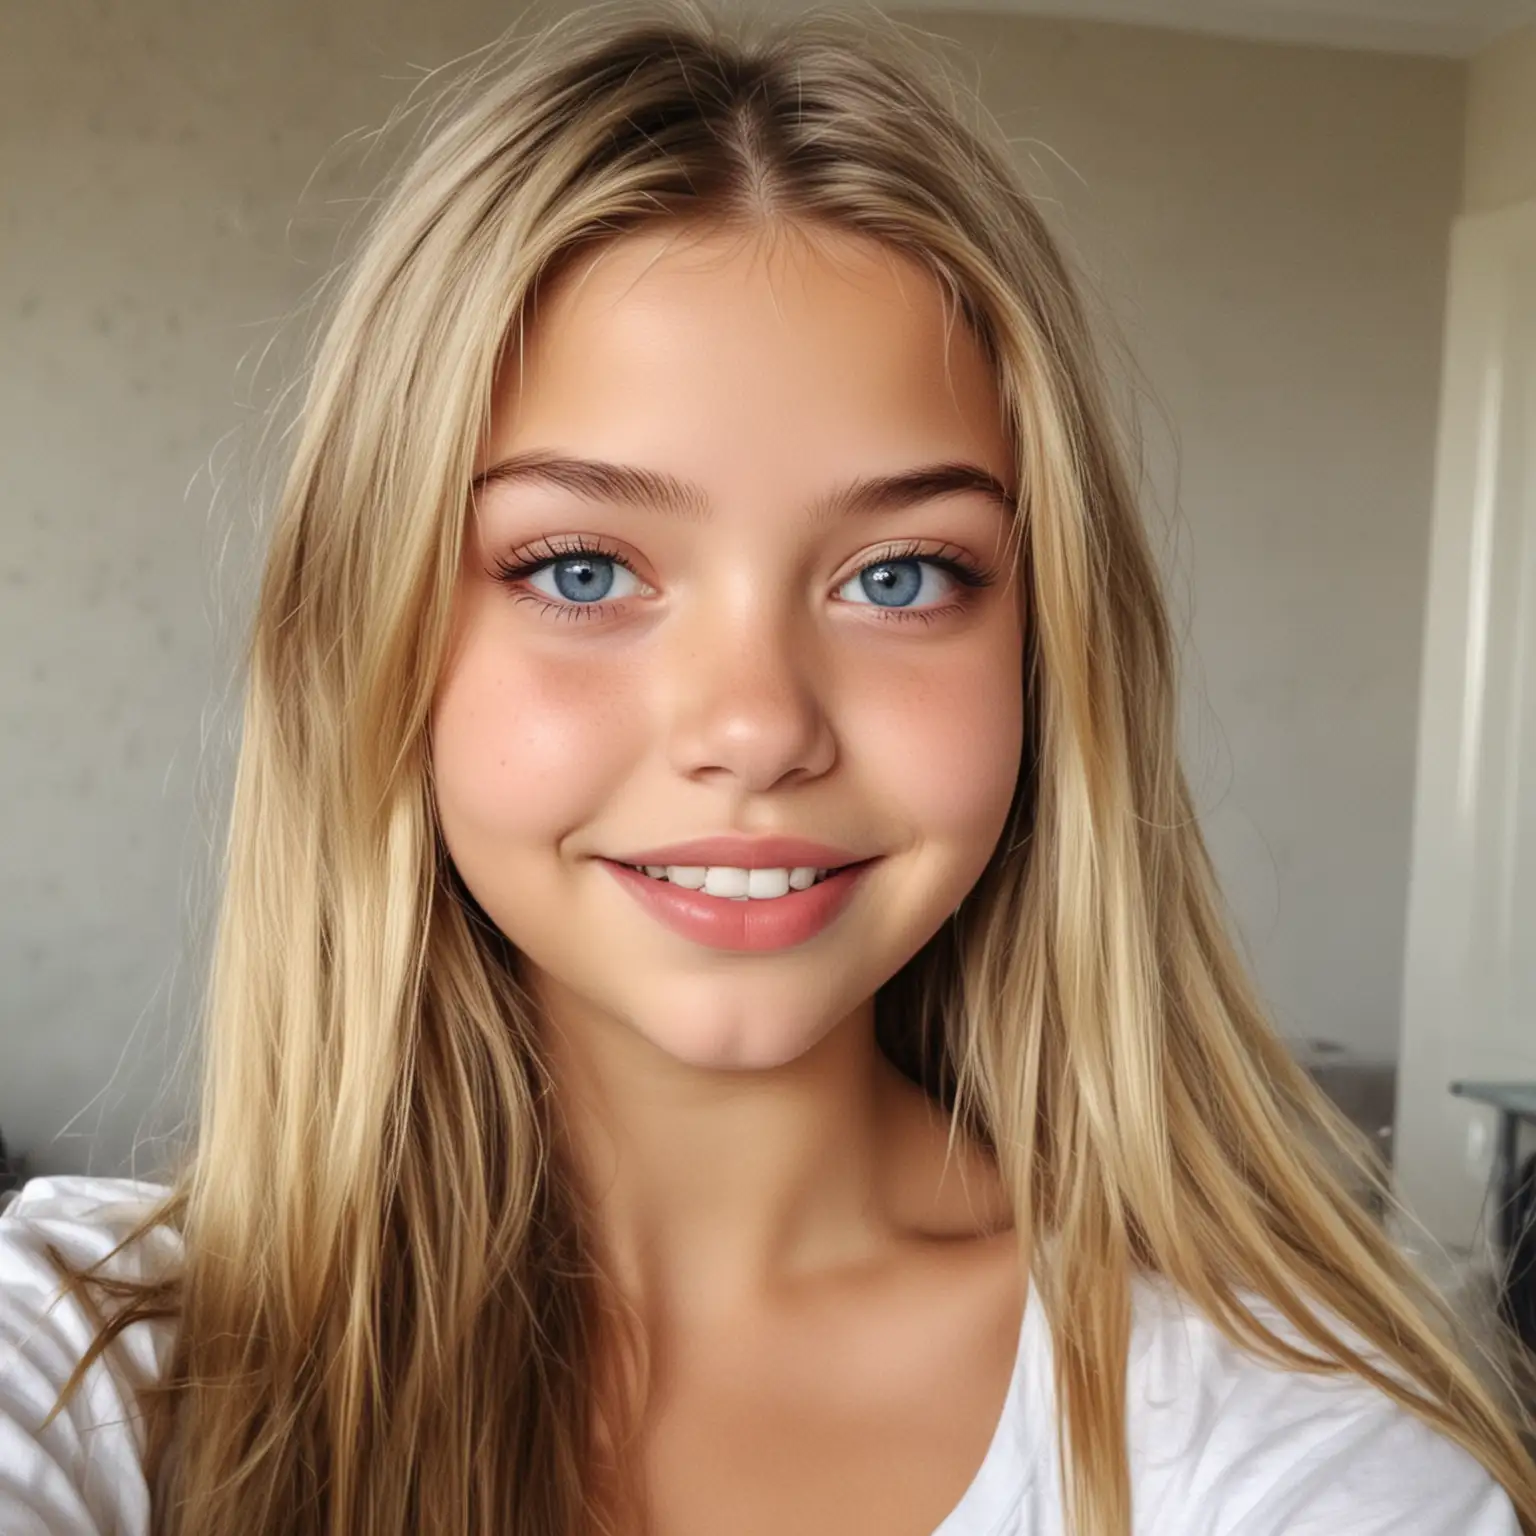 -cref https://miramuseai.net/9267400 -cw 100 selfie of 13 year old (blonde) French girl (Thylane Blondeau). excited smile. incredibly cute, fresh, youthful. walking pose, showing her cute head and torso.  natural, everyday life BREAK blue eyes 